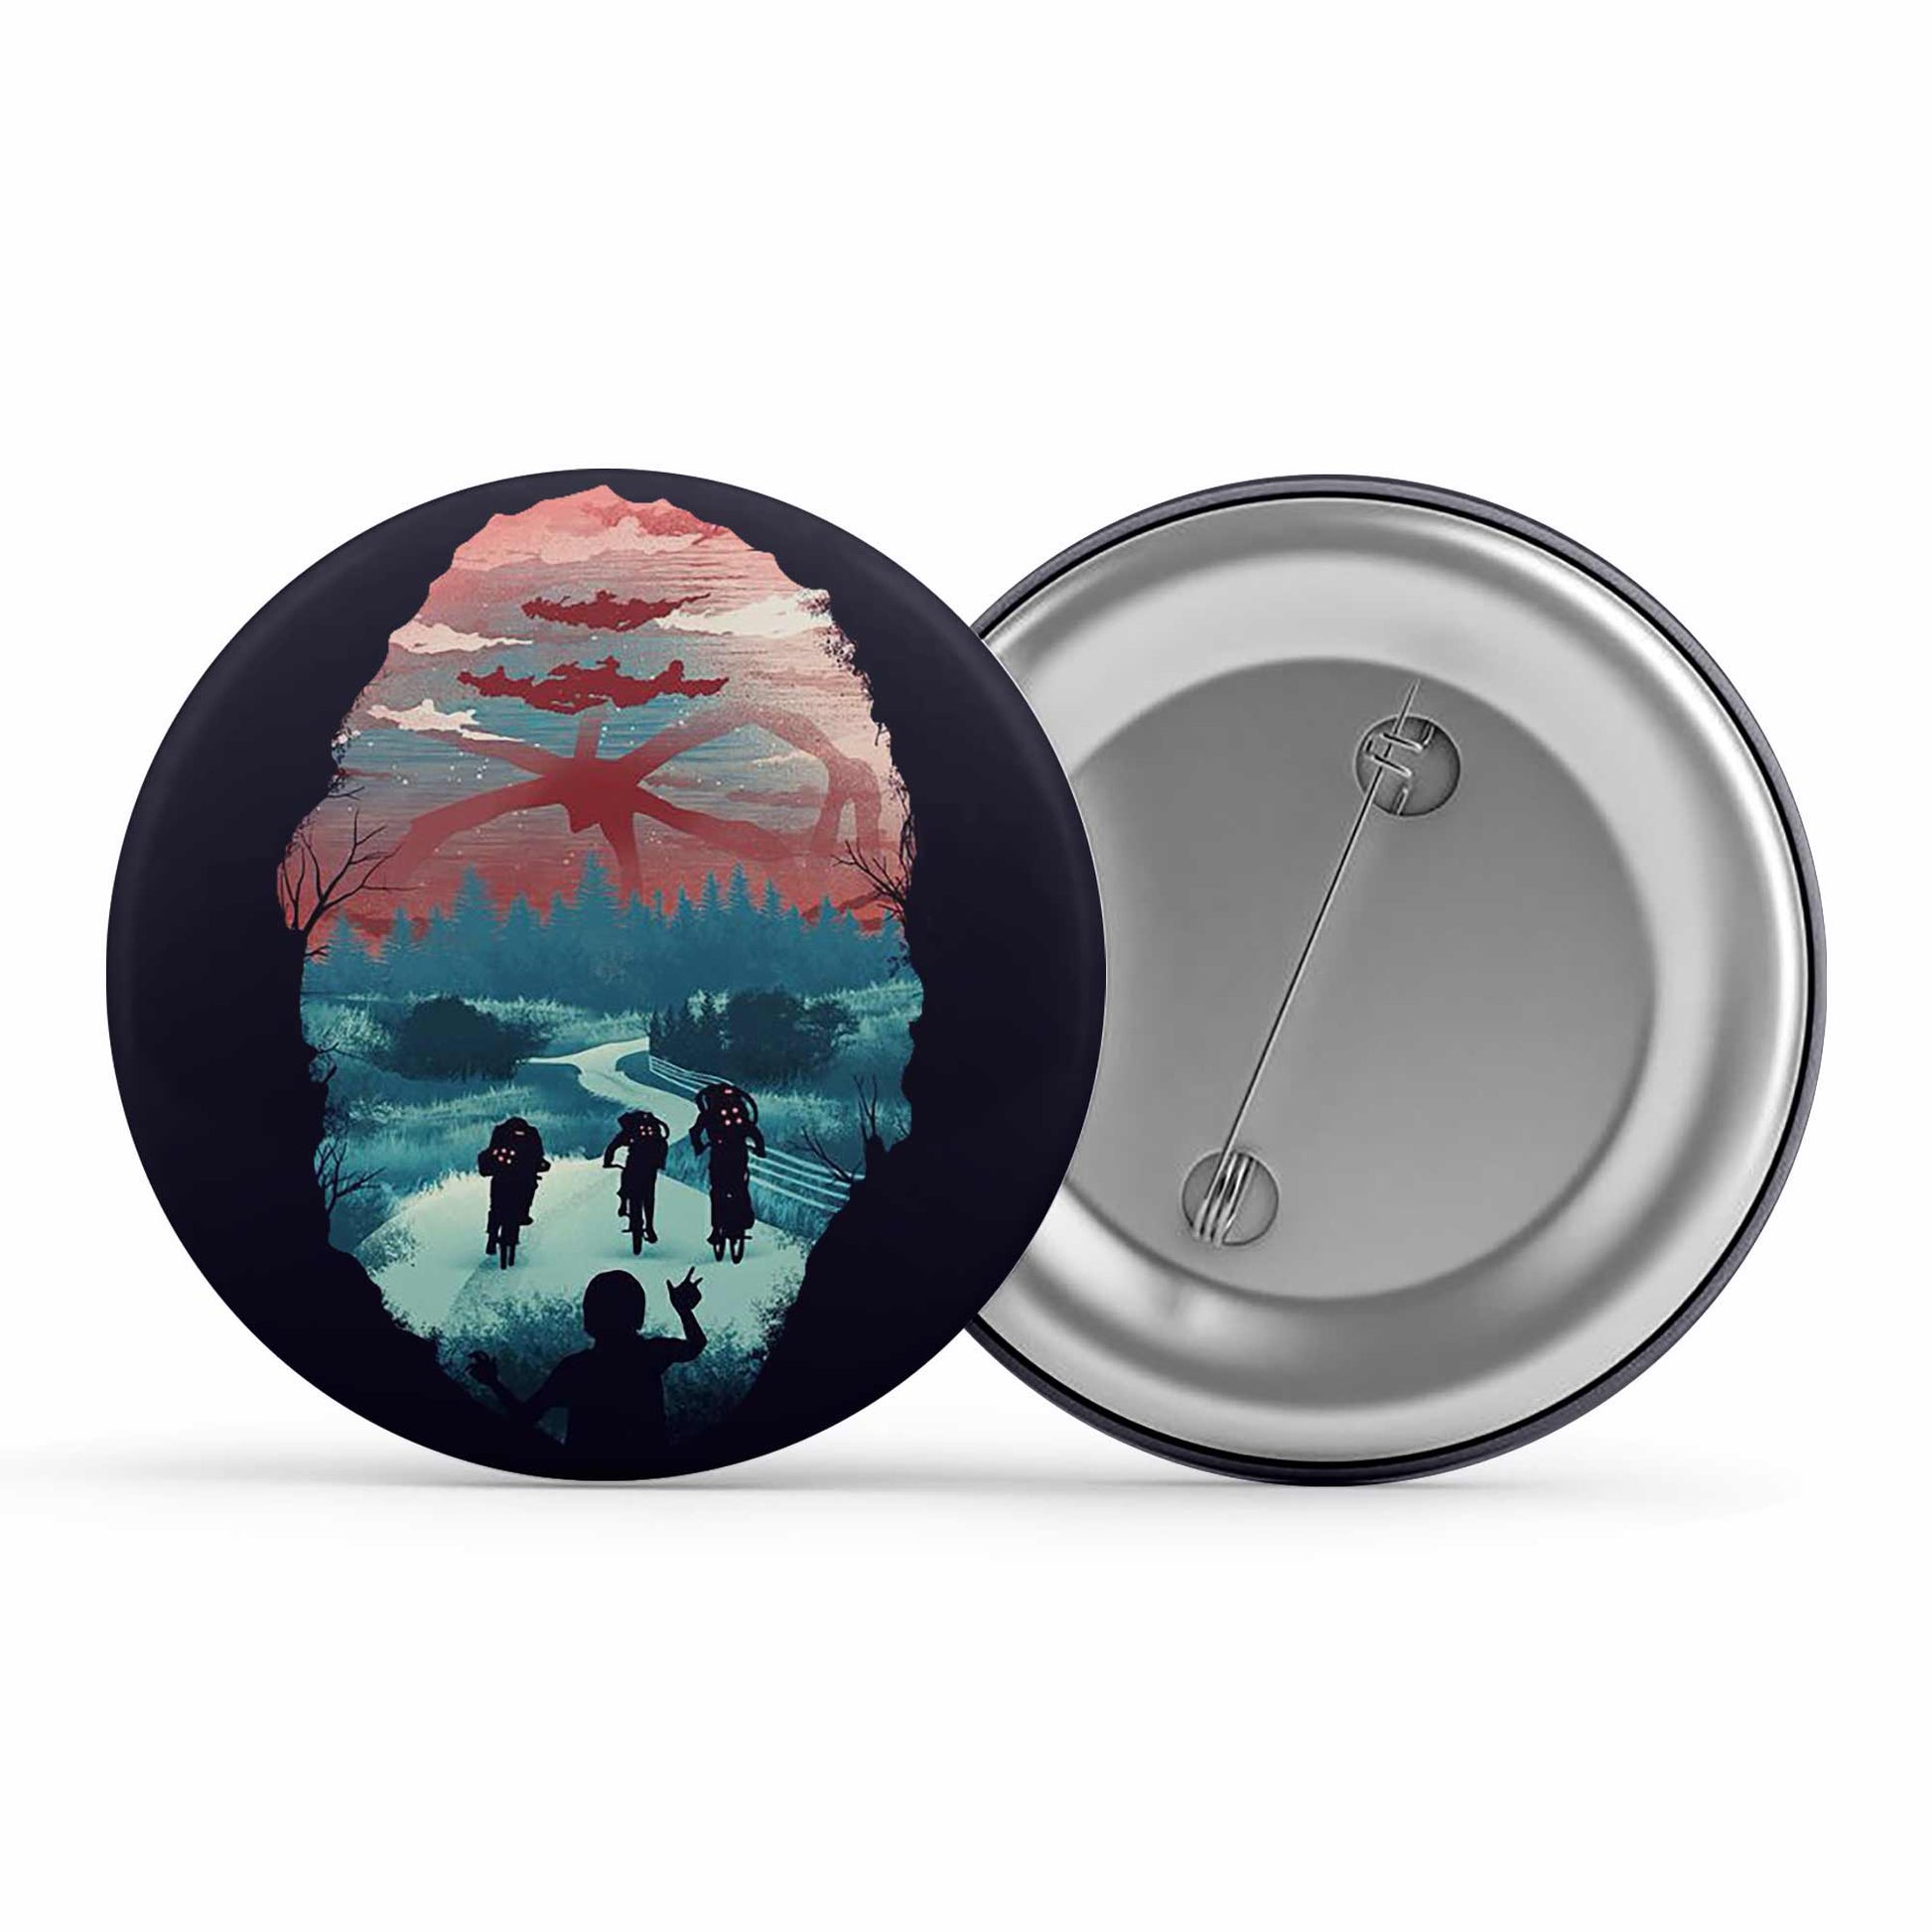 stranger things shadow monster badge pin button tv & movies buy online india the banyan tee tbt men women girls boys unisex  stranger things eleven demogorgon shadow monster dustin quote vector art clothing accessories merchandise